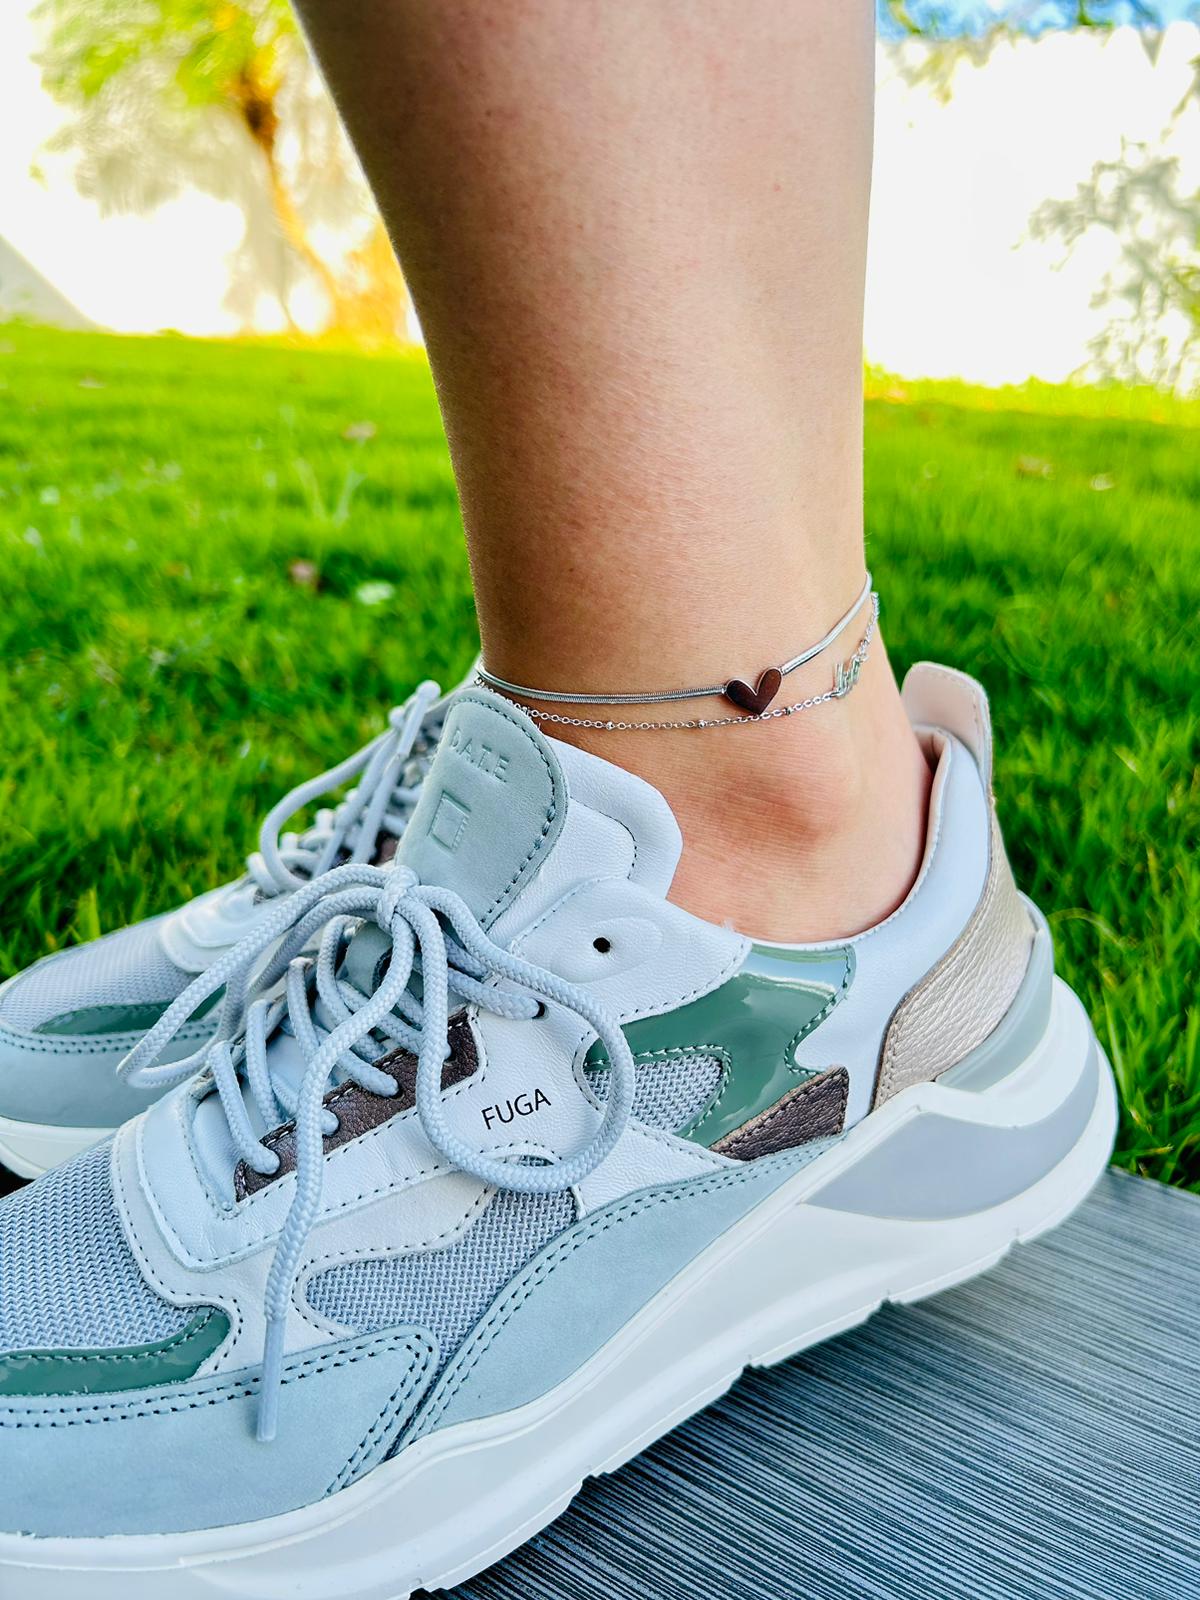 Double silver ankle